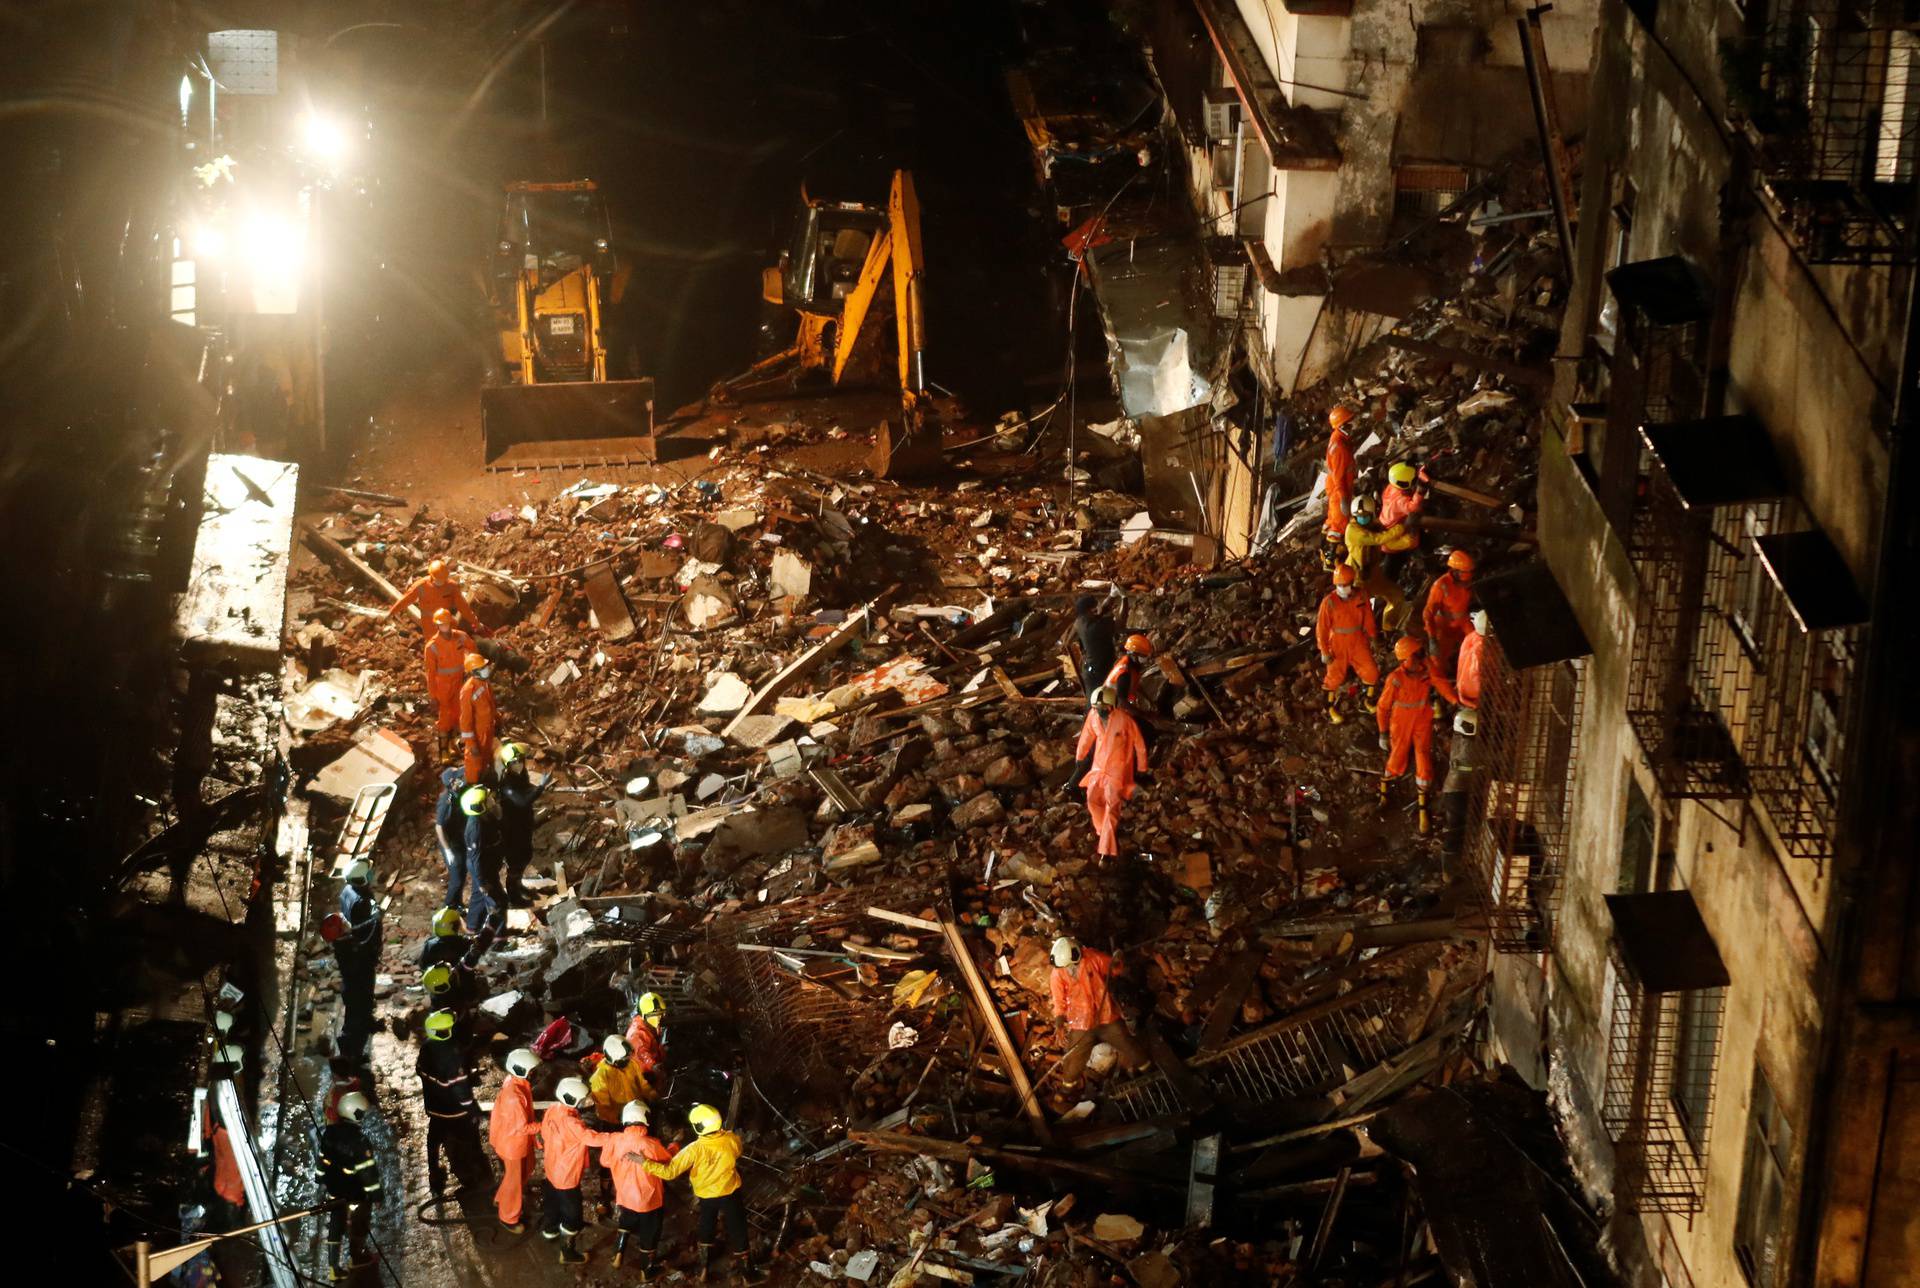 National Disaster Response Force (NDRF) and fire brigade personnel look for survivors trapped in the debris after part of a residential building collapsed following heavy rains in Mumbai